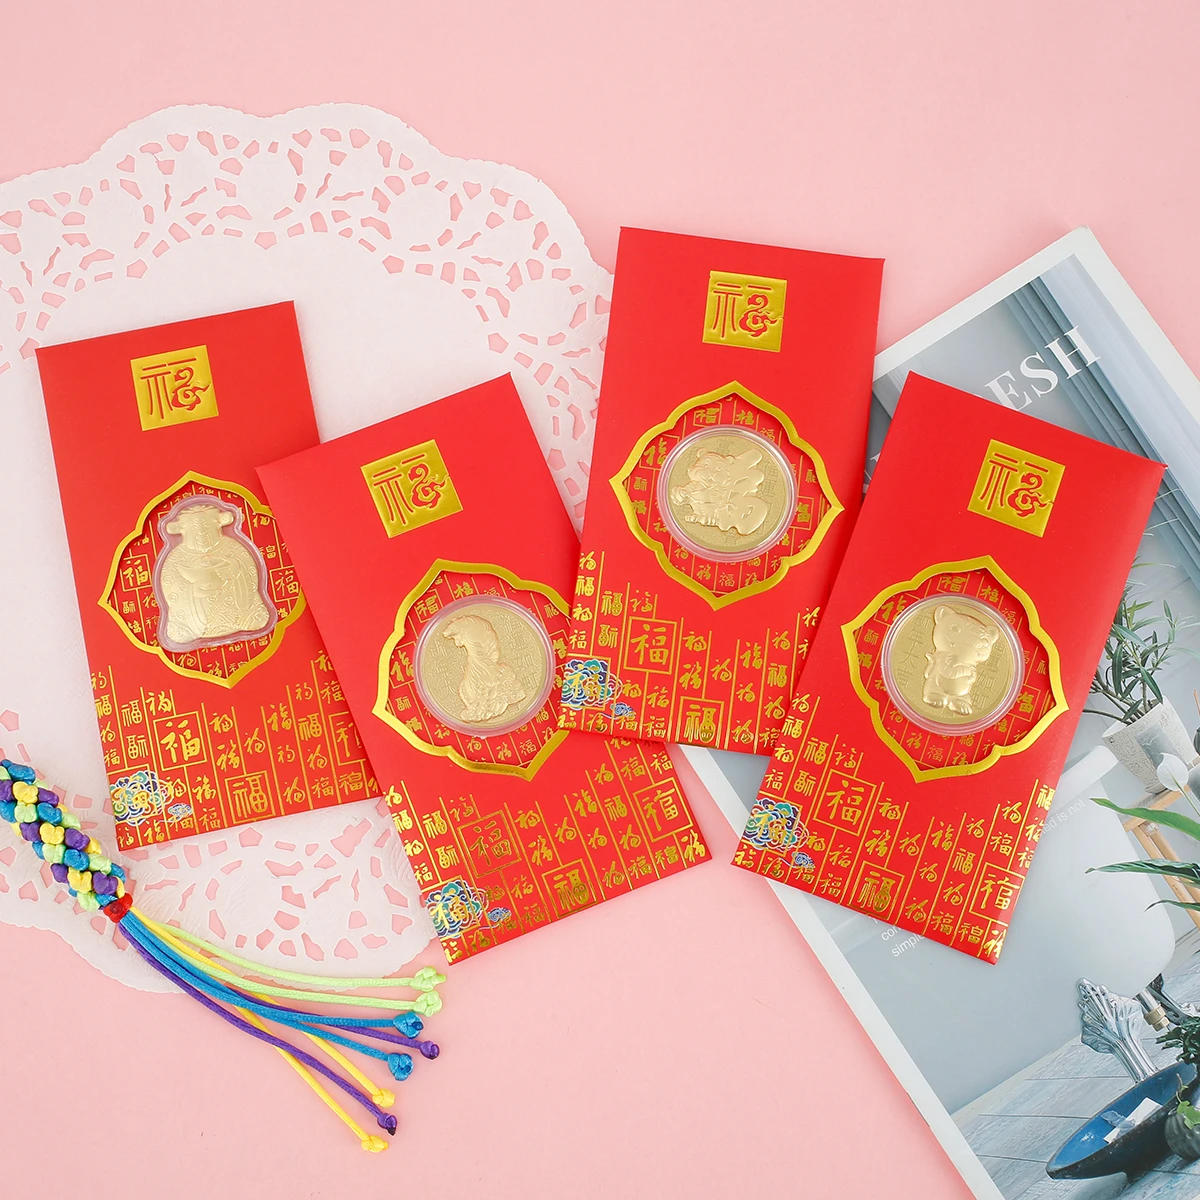 PRETYZOOM 30pcs Chinese New Year Red Envelopes 2022 Tiger Year Money Envelope Hong Bao Lai See Lucky Money Red Packets for Chinese New Year Spring Festival Supply